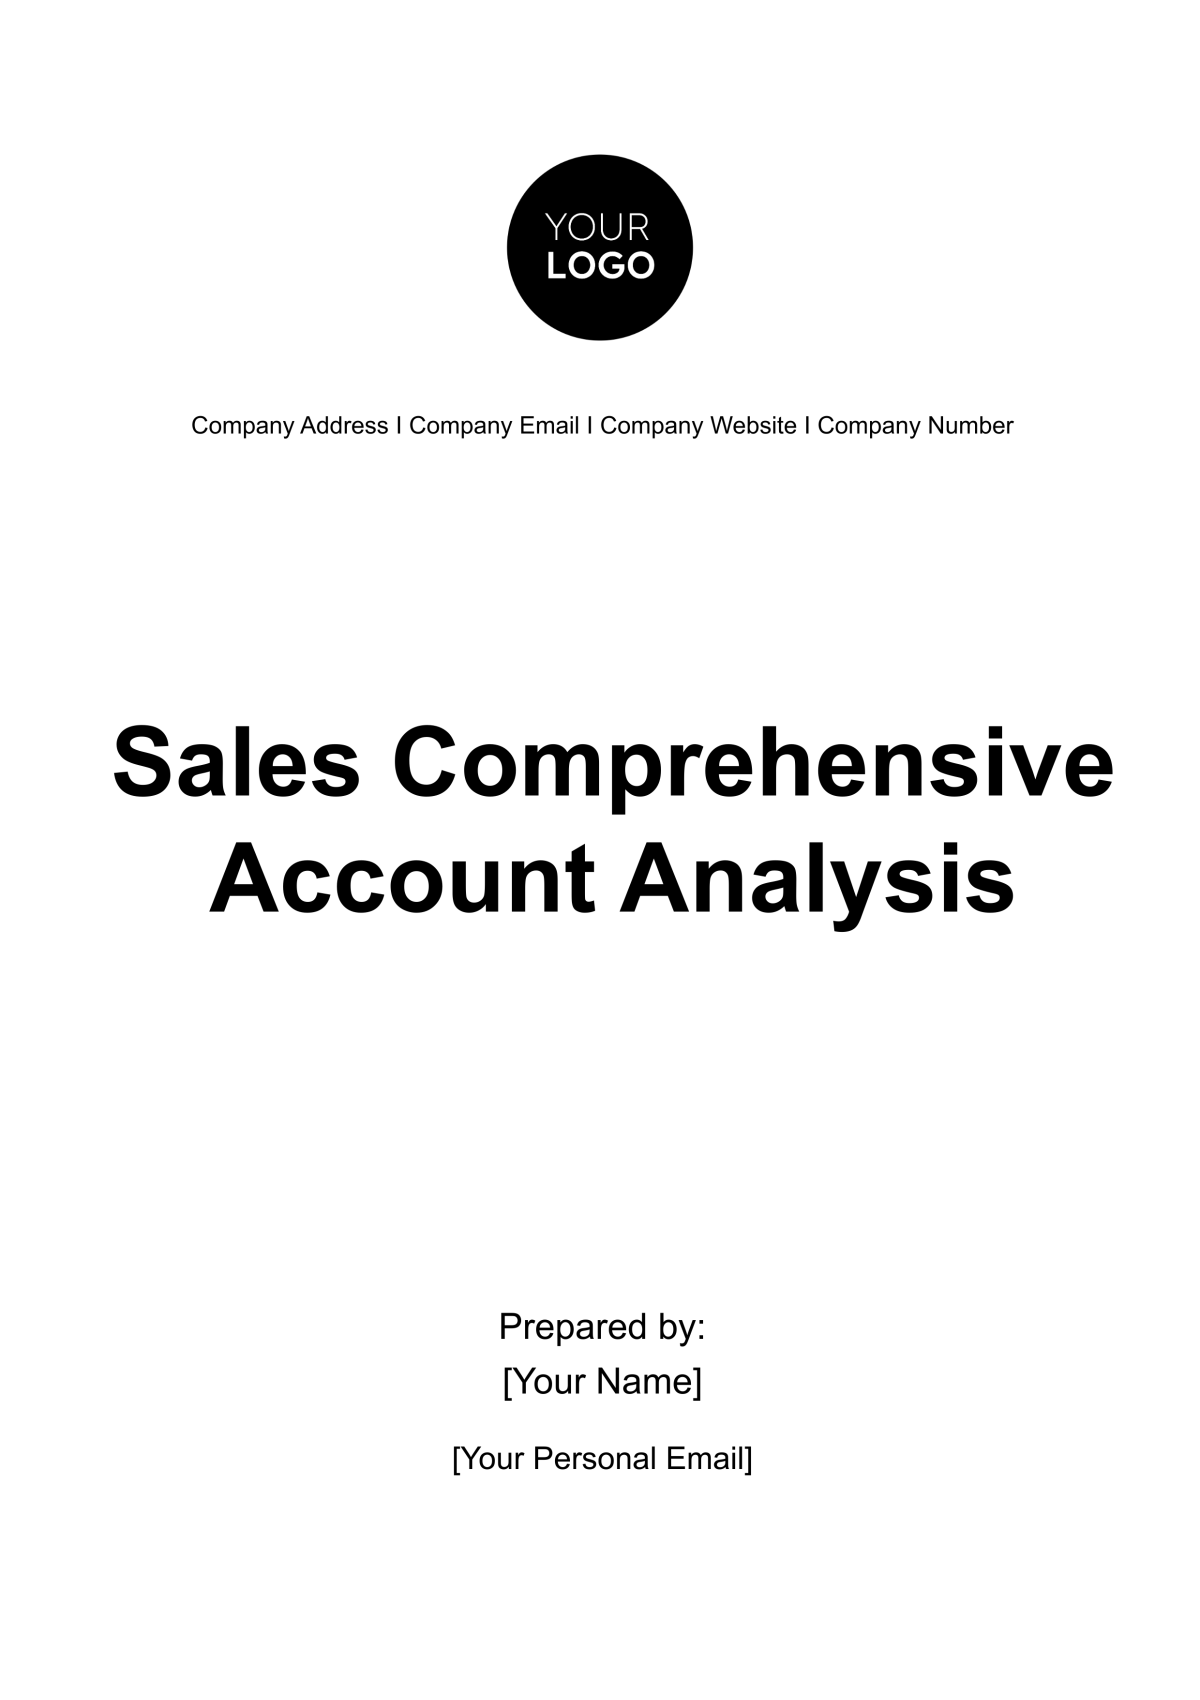 Sales Comprehensive Account Analysis Template